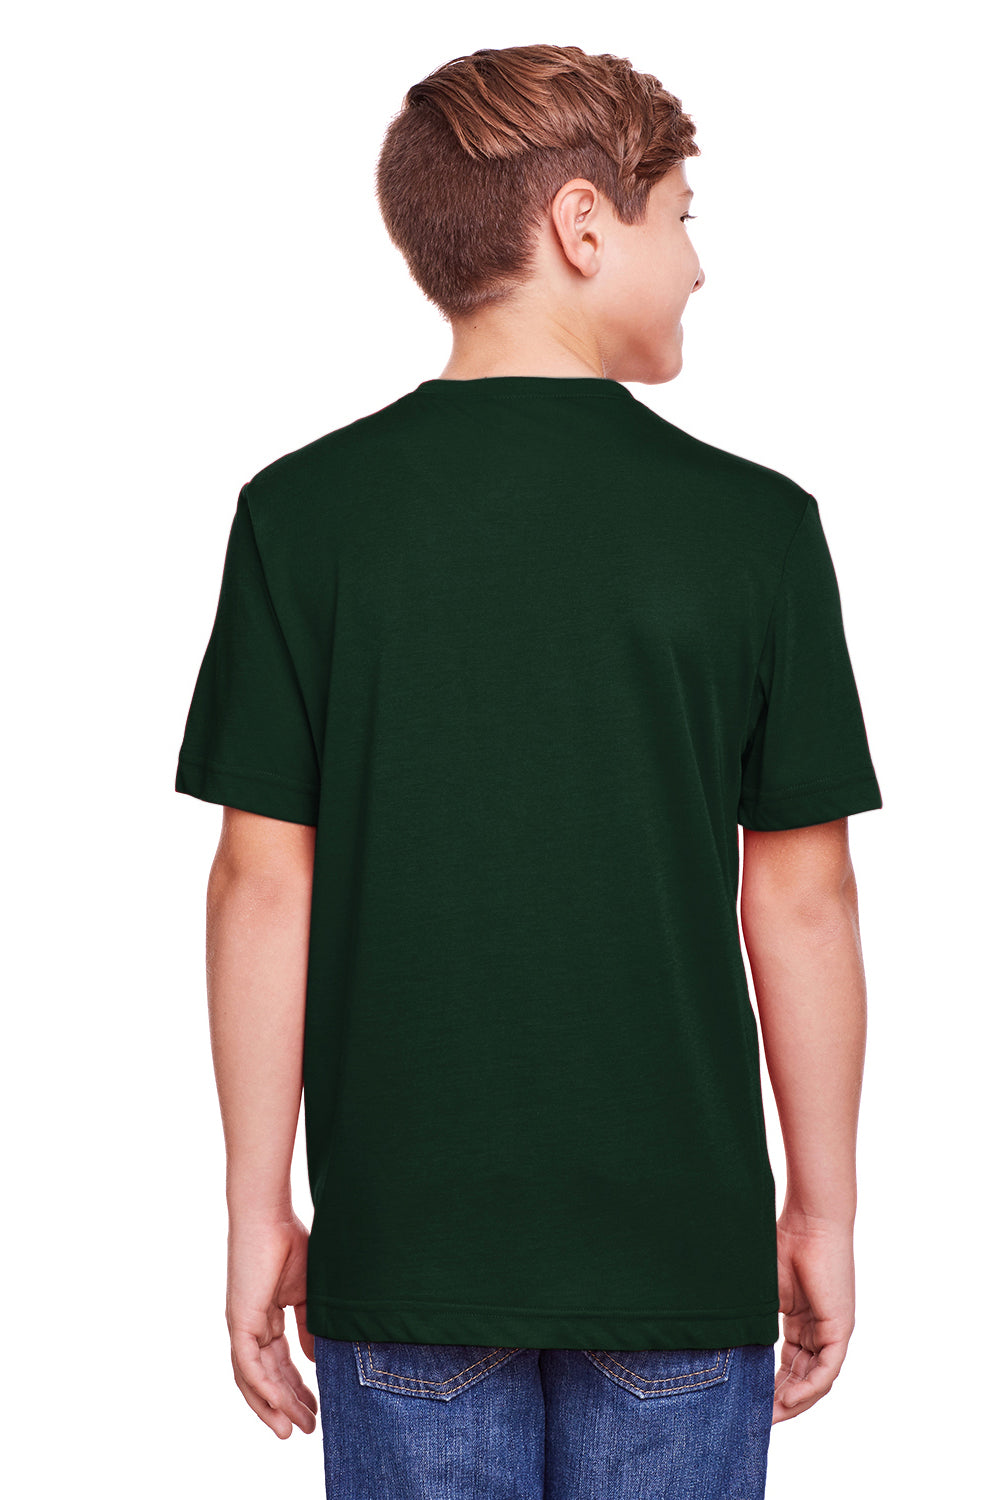 Core 365 CE111Y Youth Fusion ChromaSoft Performance Moisture Wicking Short Sleeve Crewneck T-Shirt Forest Green Back